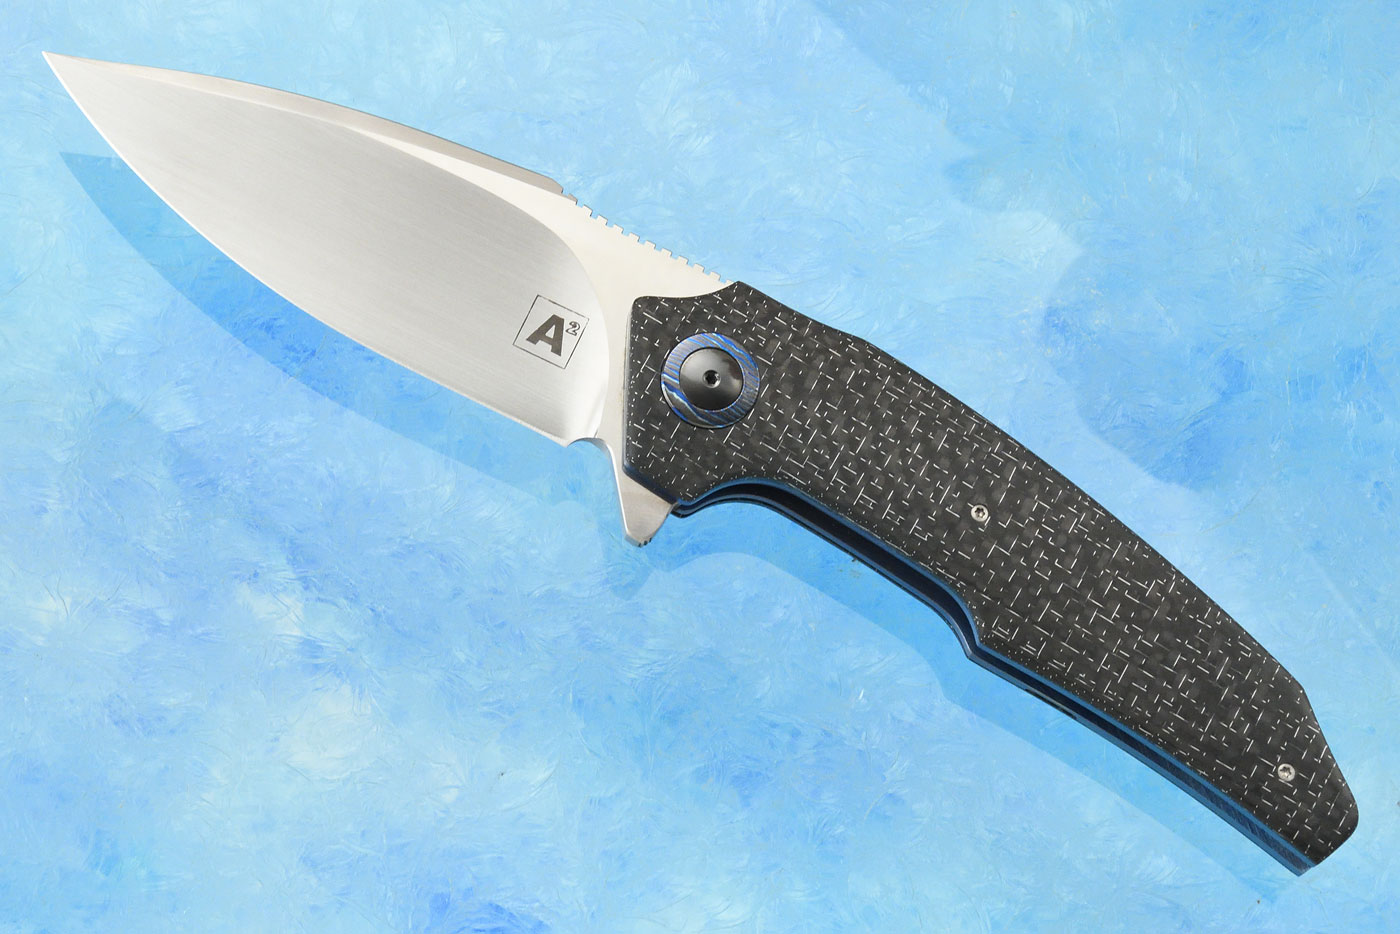 A6 Flipper with Silver Strike Carbon Fiber and Zirconium (Ceramic IKBS) - CTS-XHP